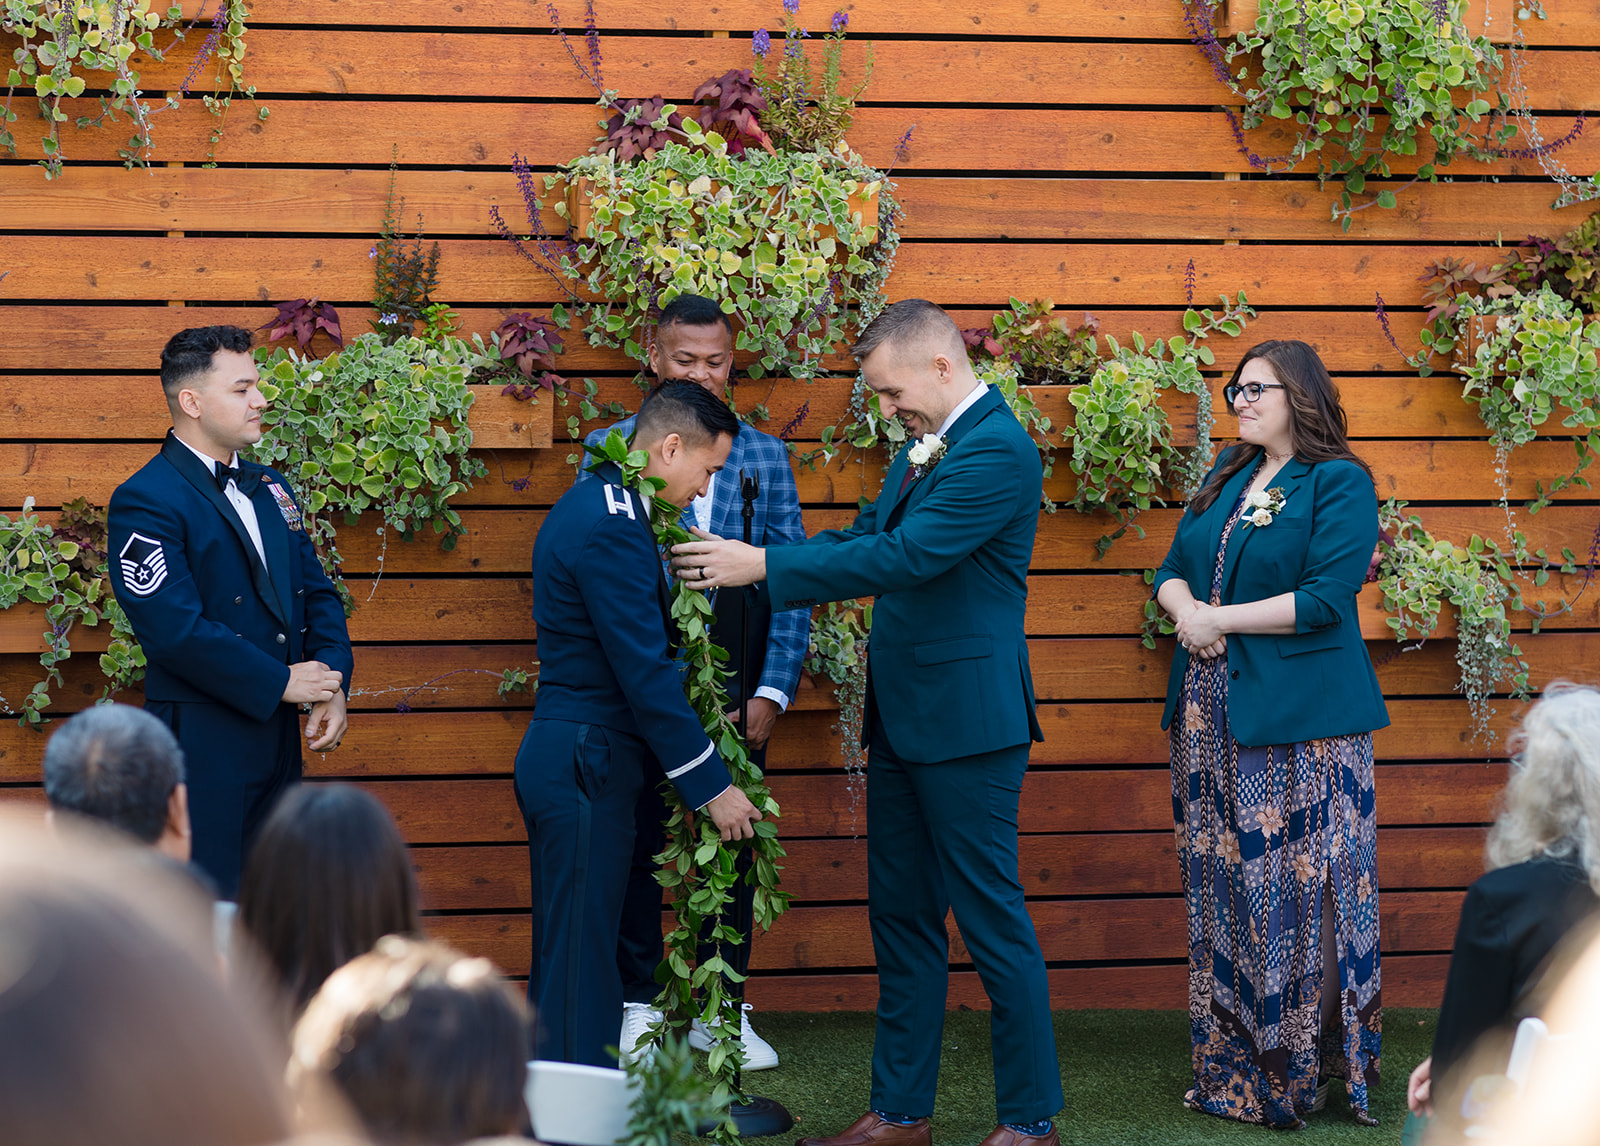 An outdoor ceremony at the Vue, one groom places a wreath of leaves over his husbands neck as a nod to his culture.